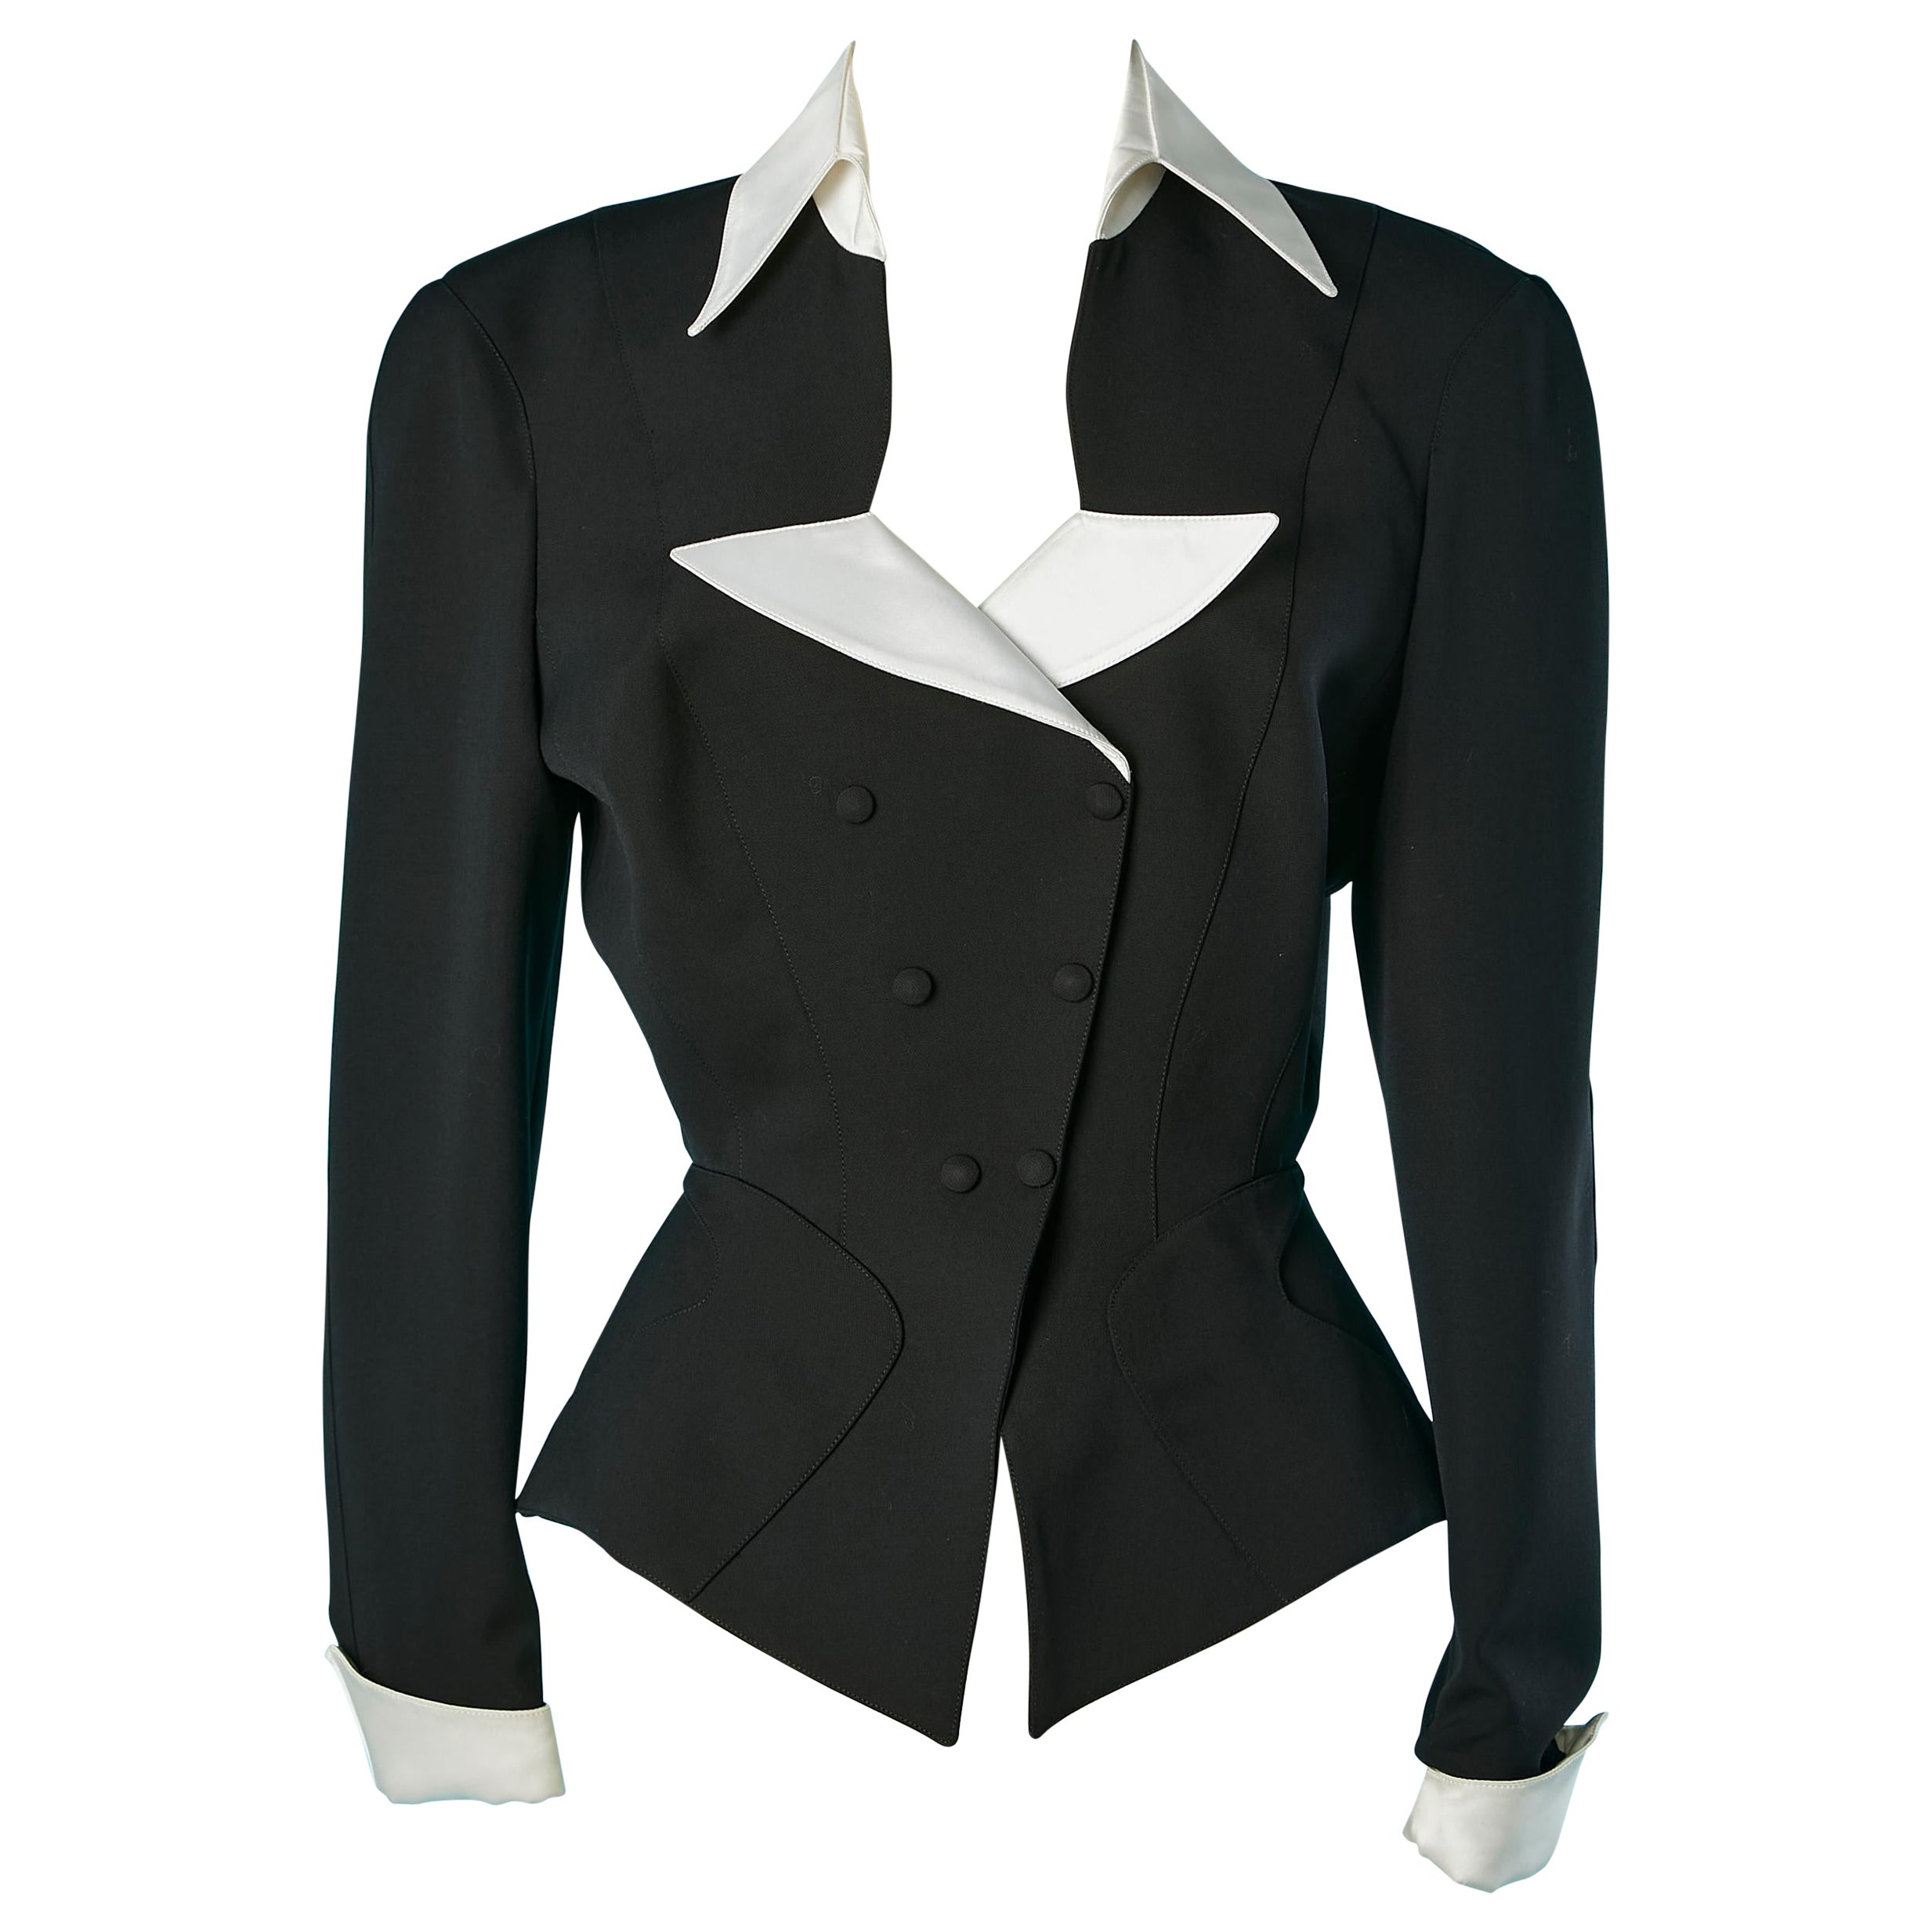 Black tuxedo double-breasted jacket with white satin collar Thierry Mugler 